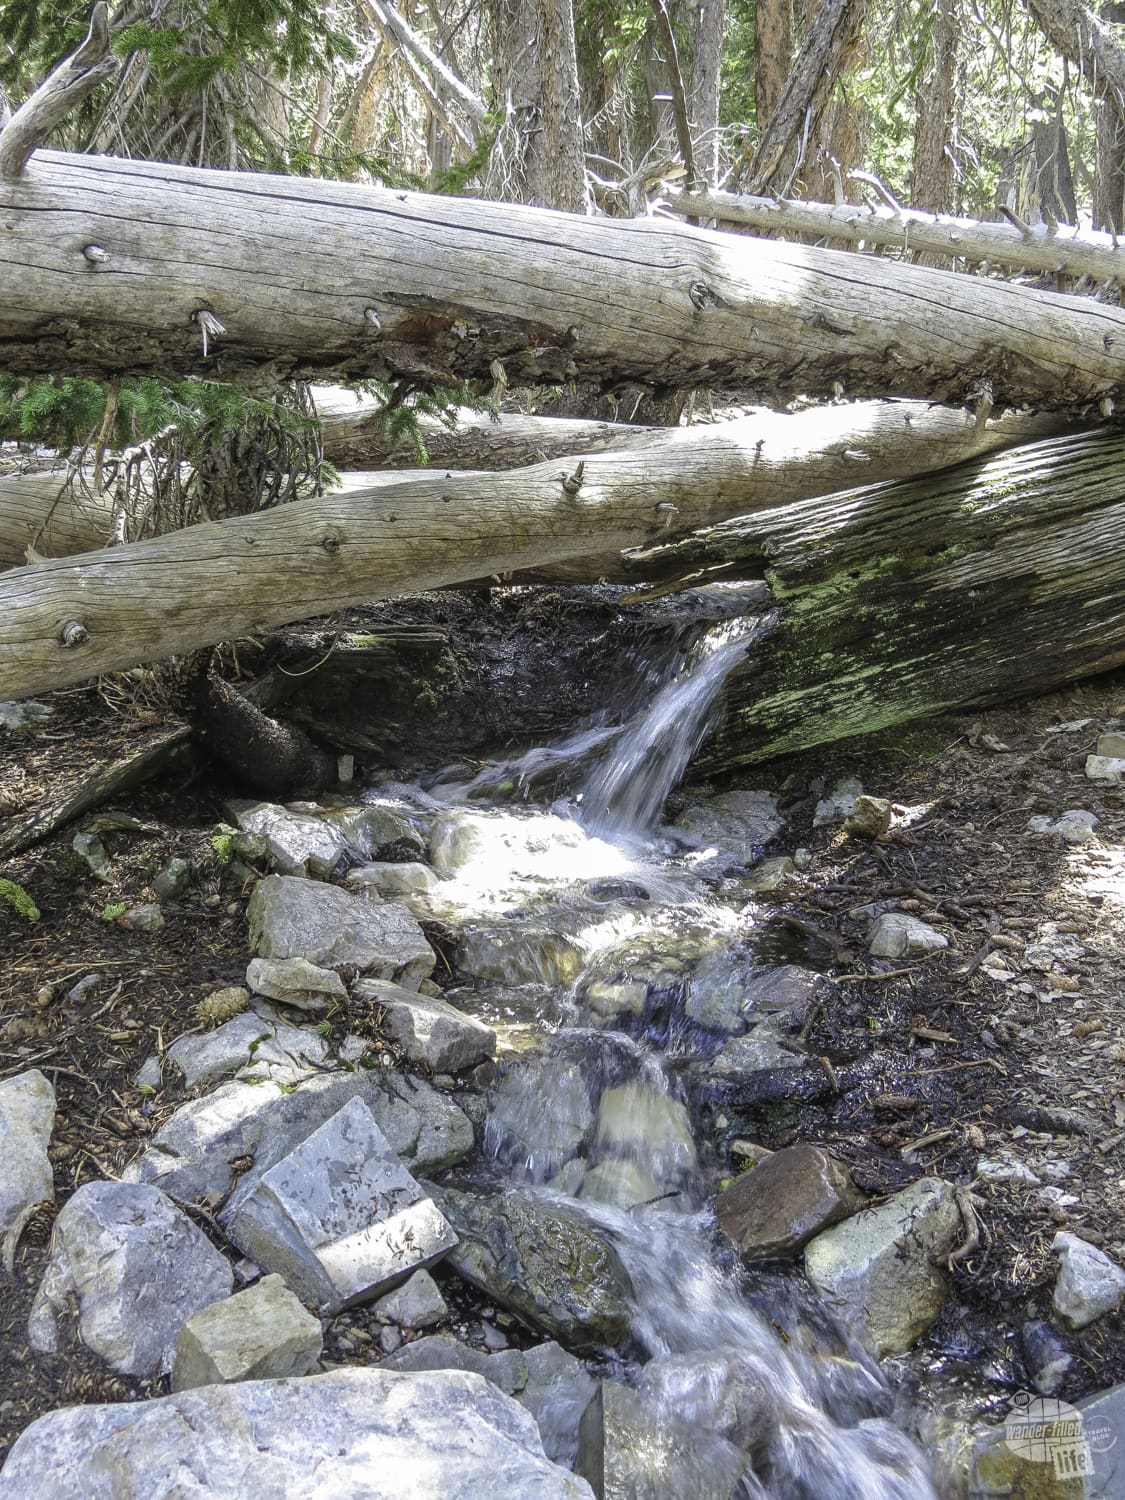 The stream takes over a log in Great Basin NP.